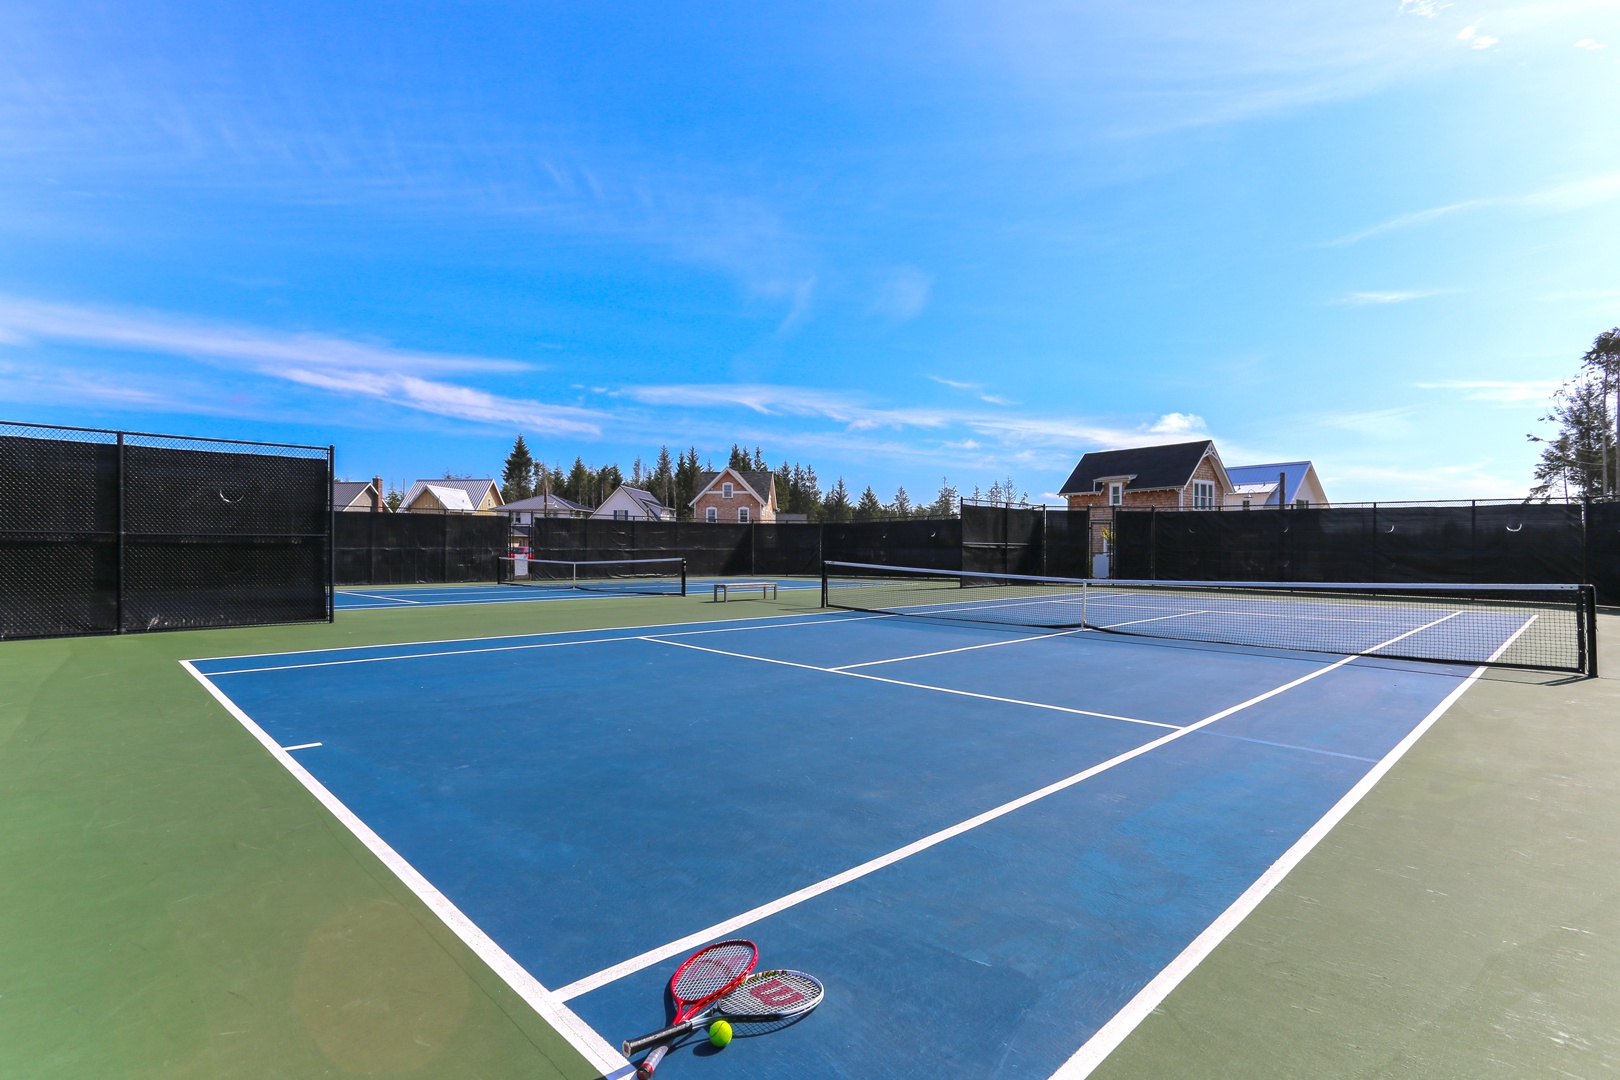 Make sure to pack your tennis racket on your next trip to Seabrook - tennis courts and pickle ball courts await in the Farm District	